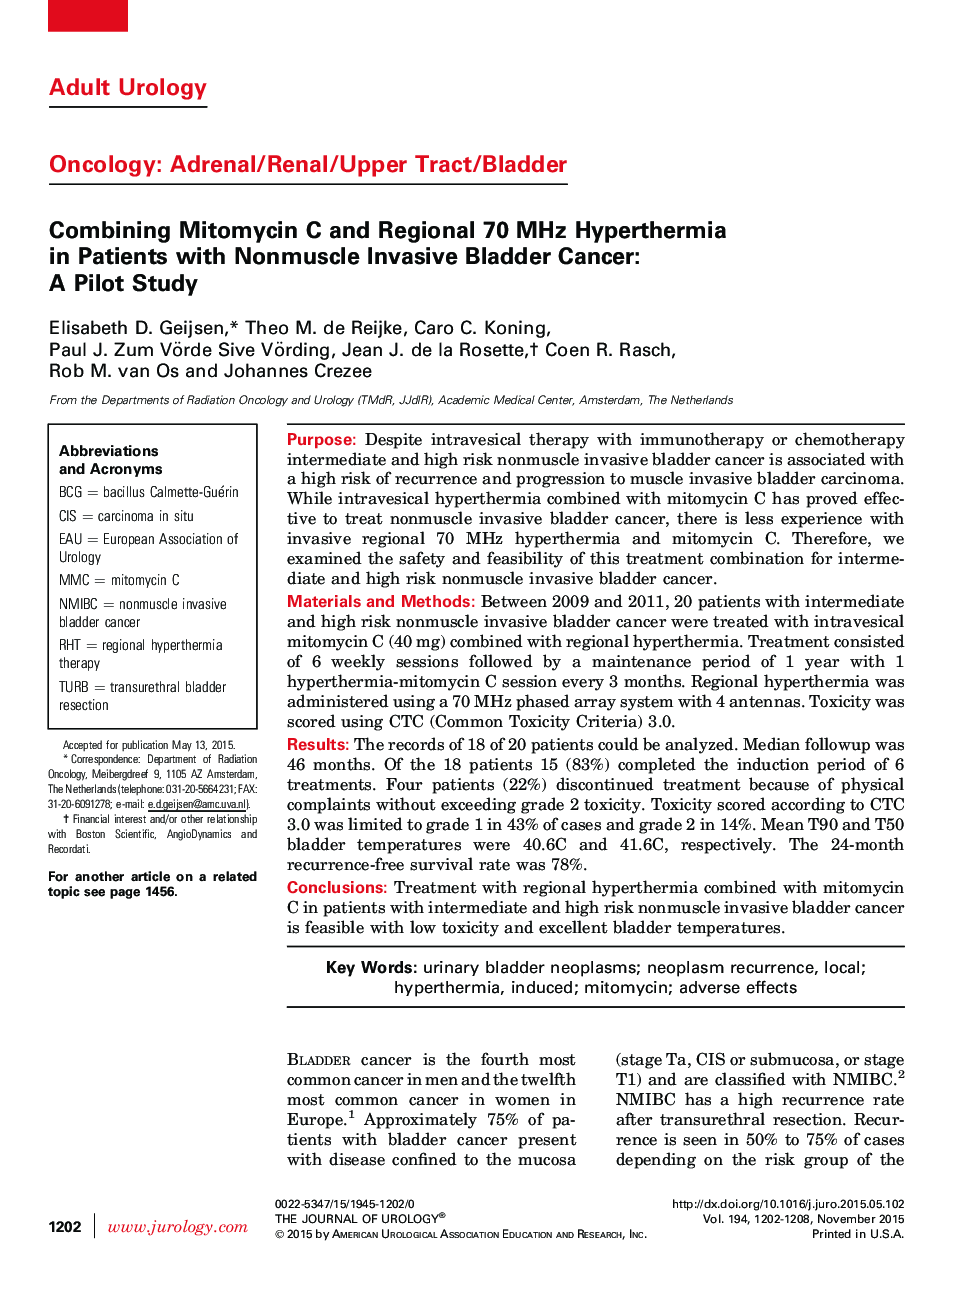 Combining Mitomycin C and Regional 70 MHz Hyperthermia in Patients with Nonmuscle Invasive Bladder Cancer: A Pilot Study 